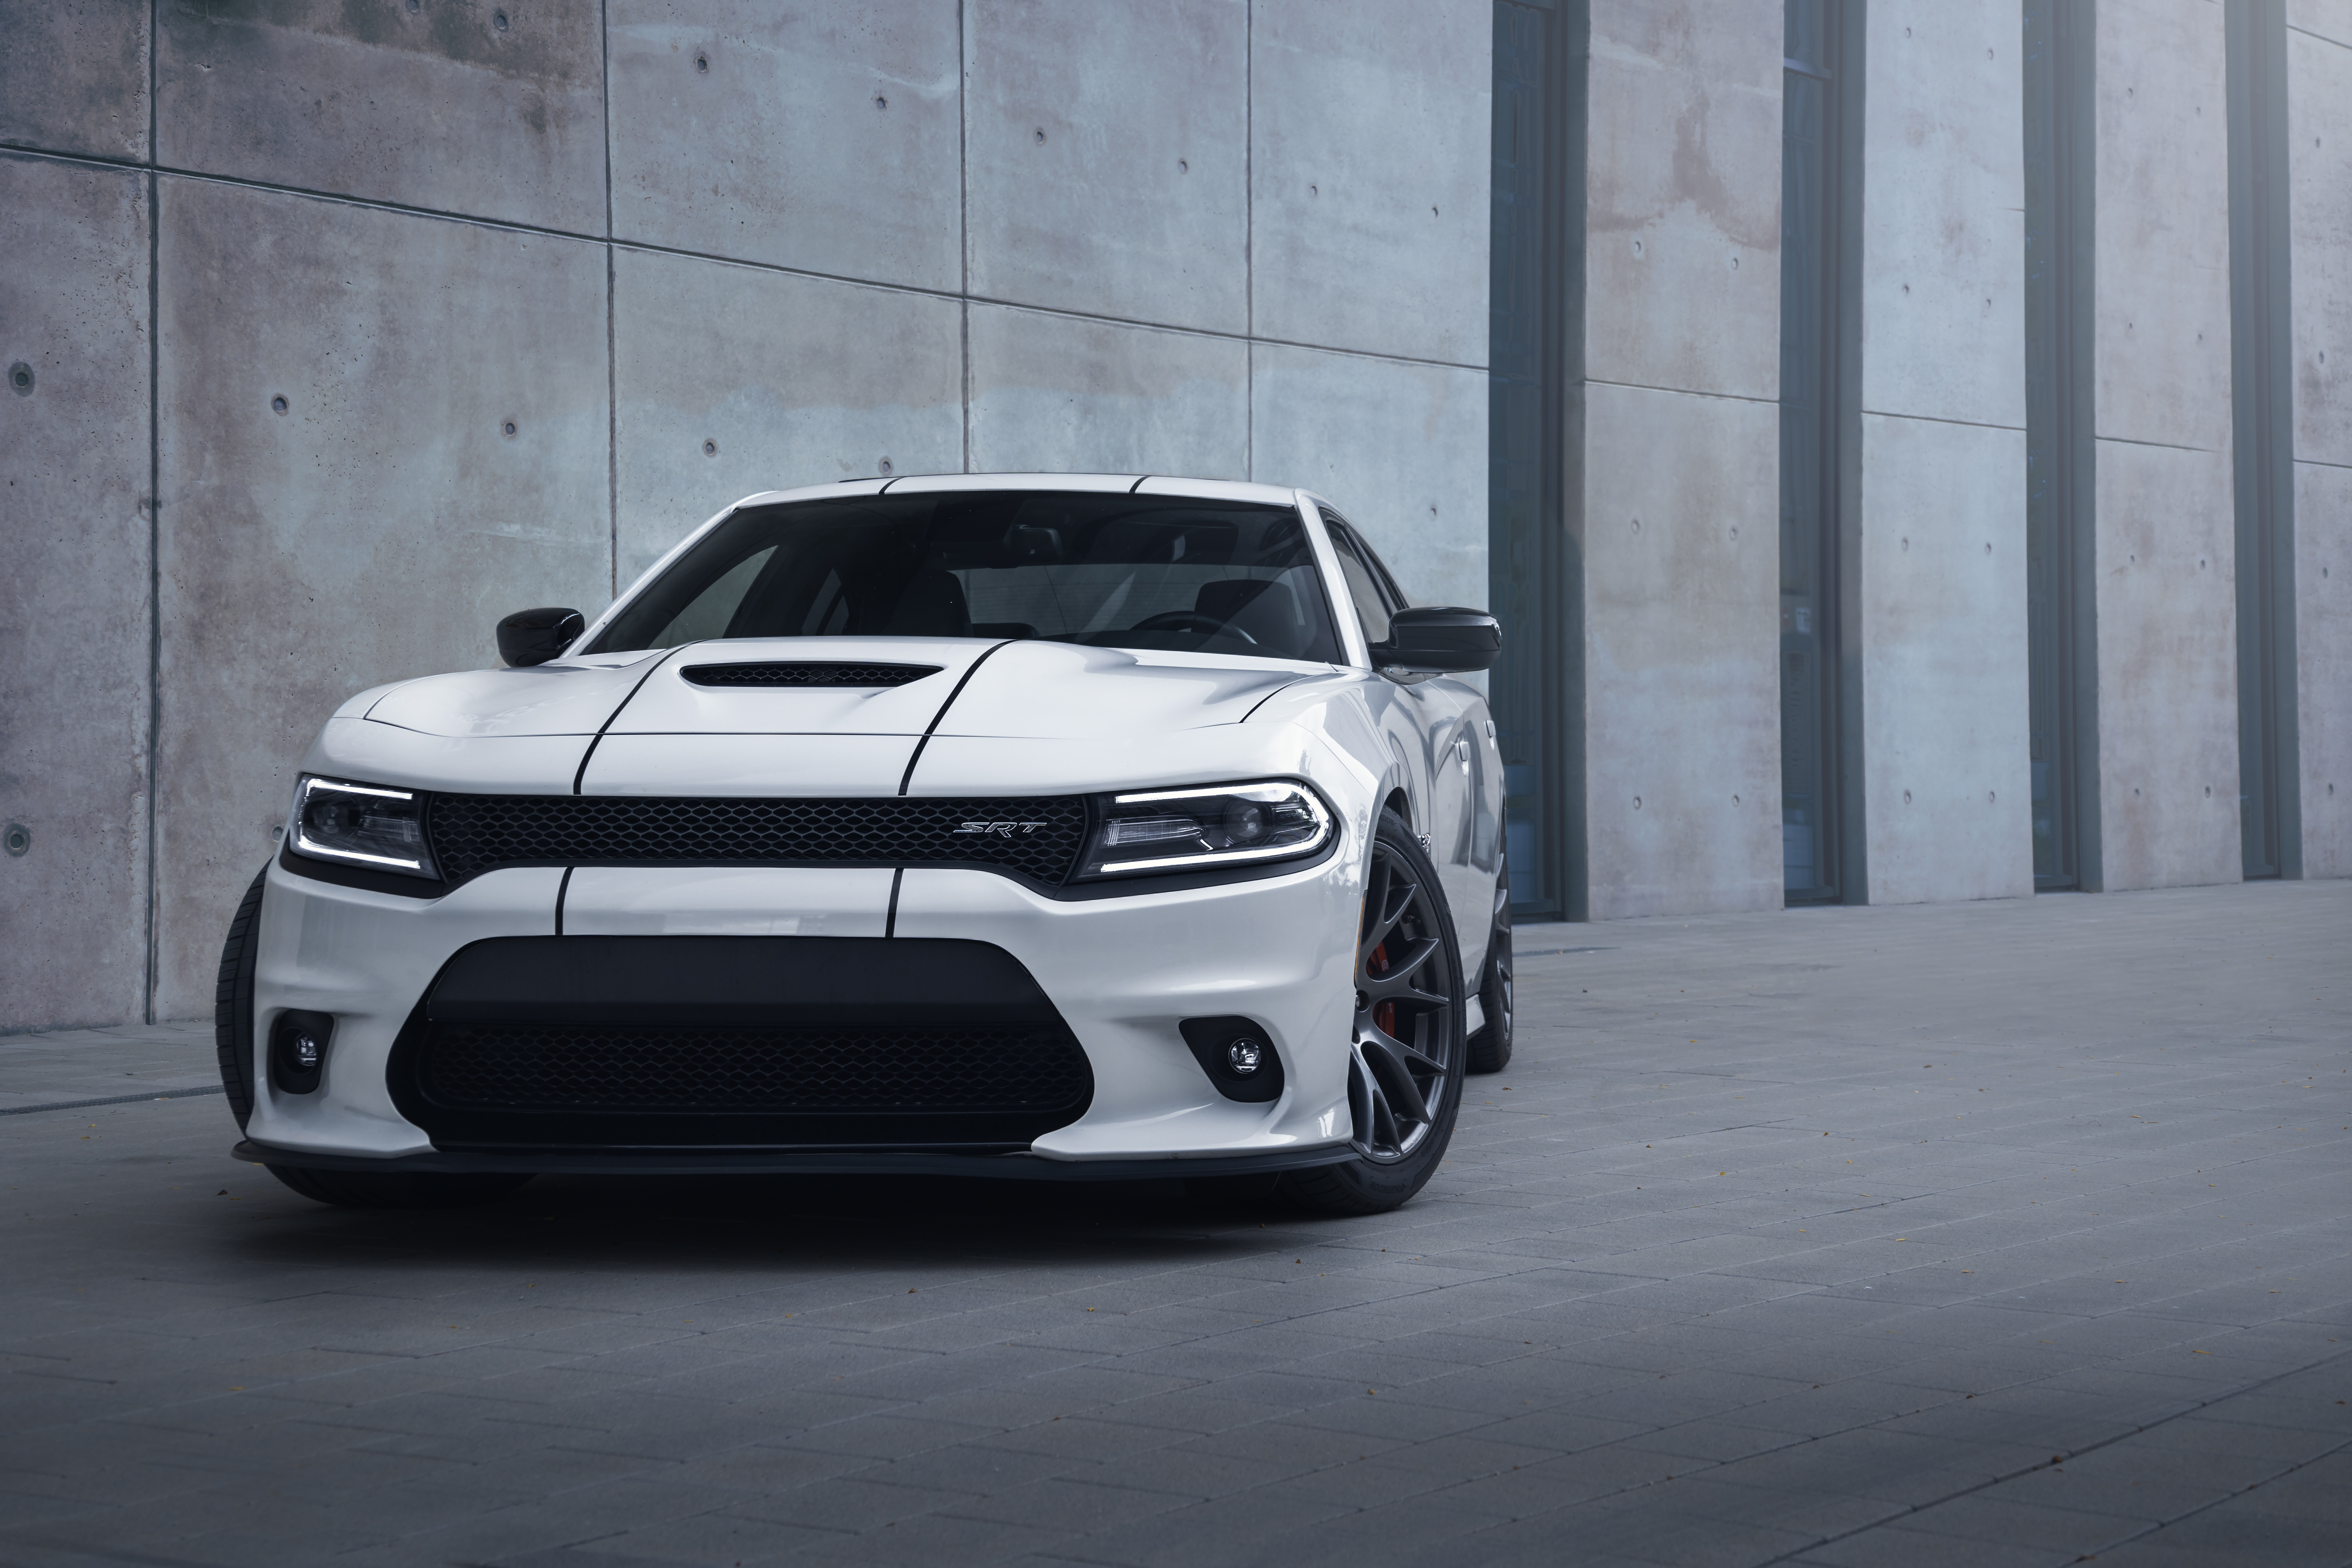 Dodge Charger Dodge Charger Muscle Cars American Cars SRT White Cars Tuning Supercars 5439x3626